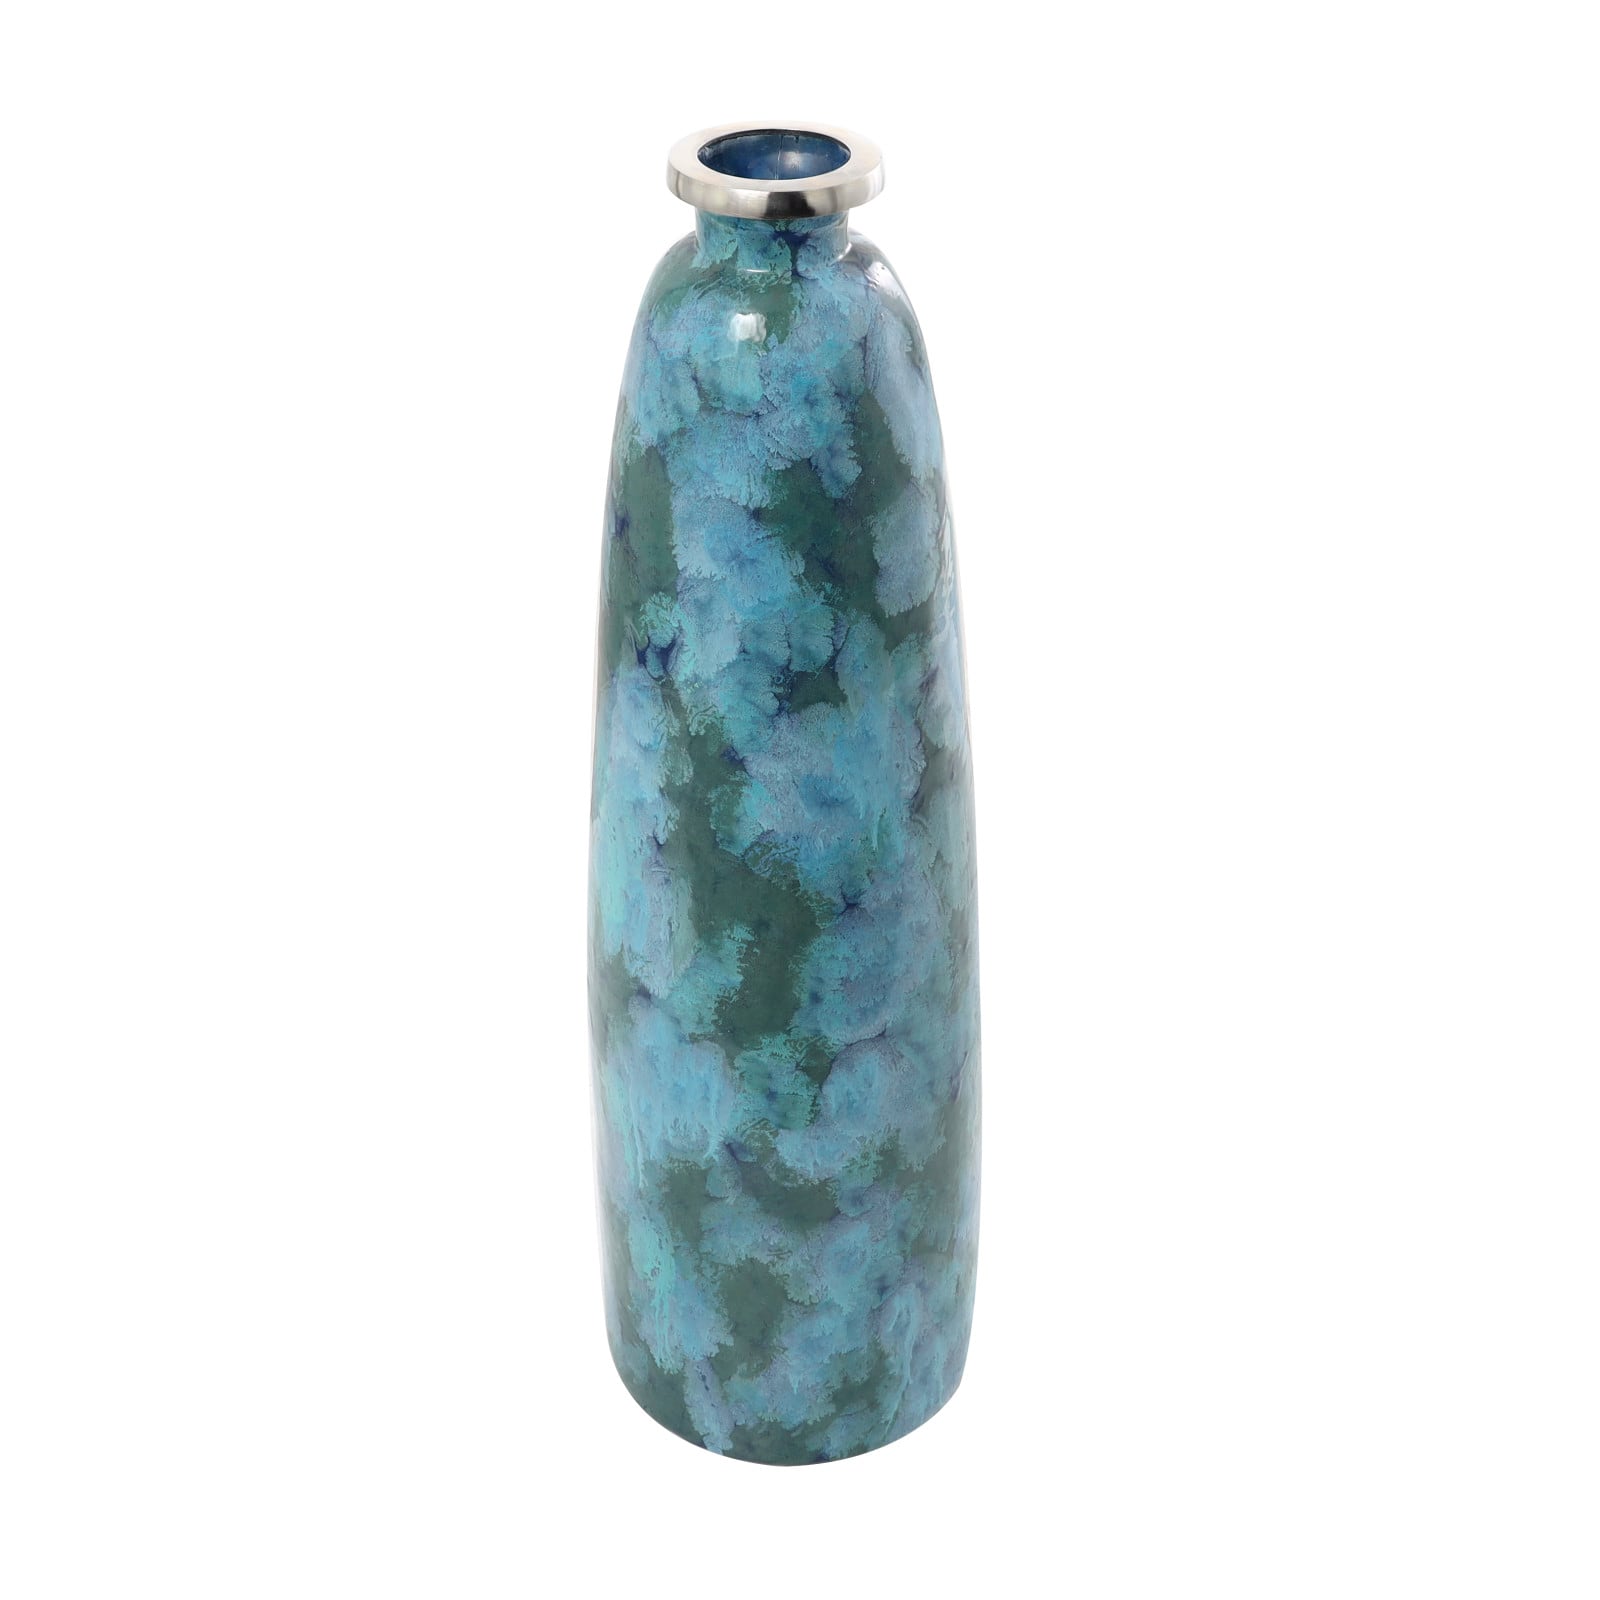 3ft. Teal Glass Handmade Vase with Silver Rim